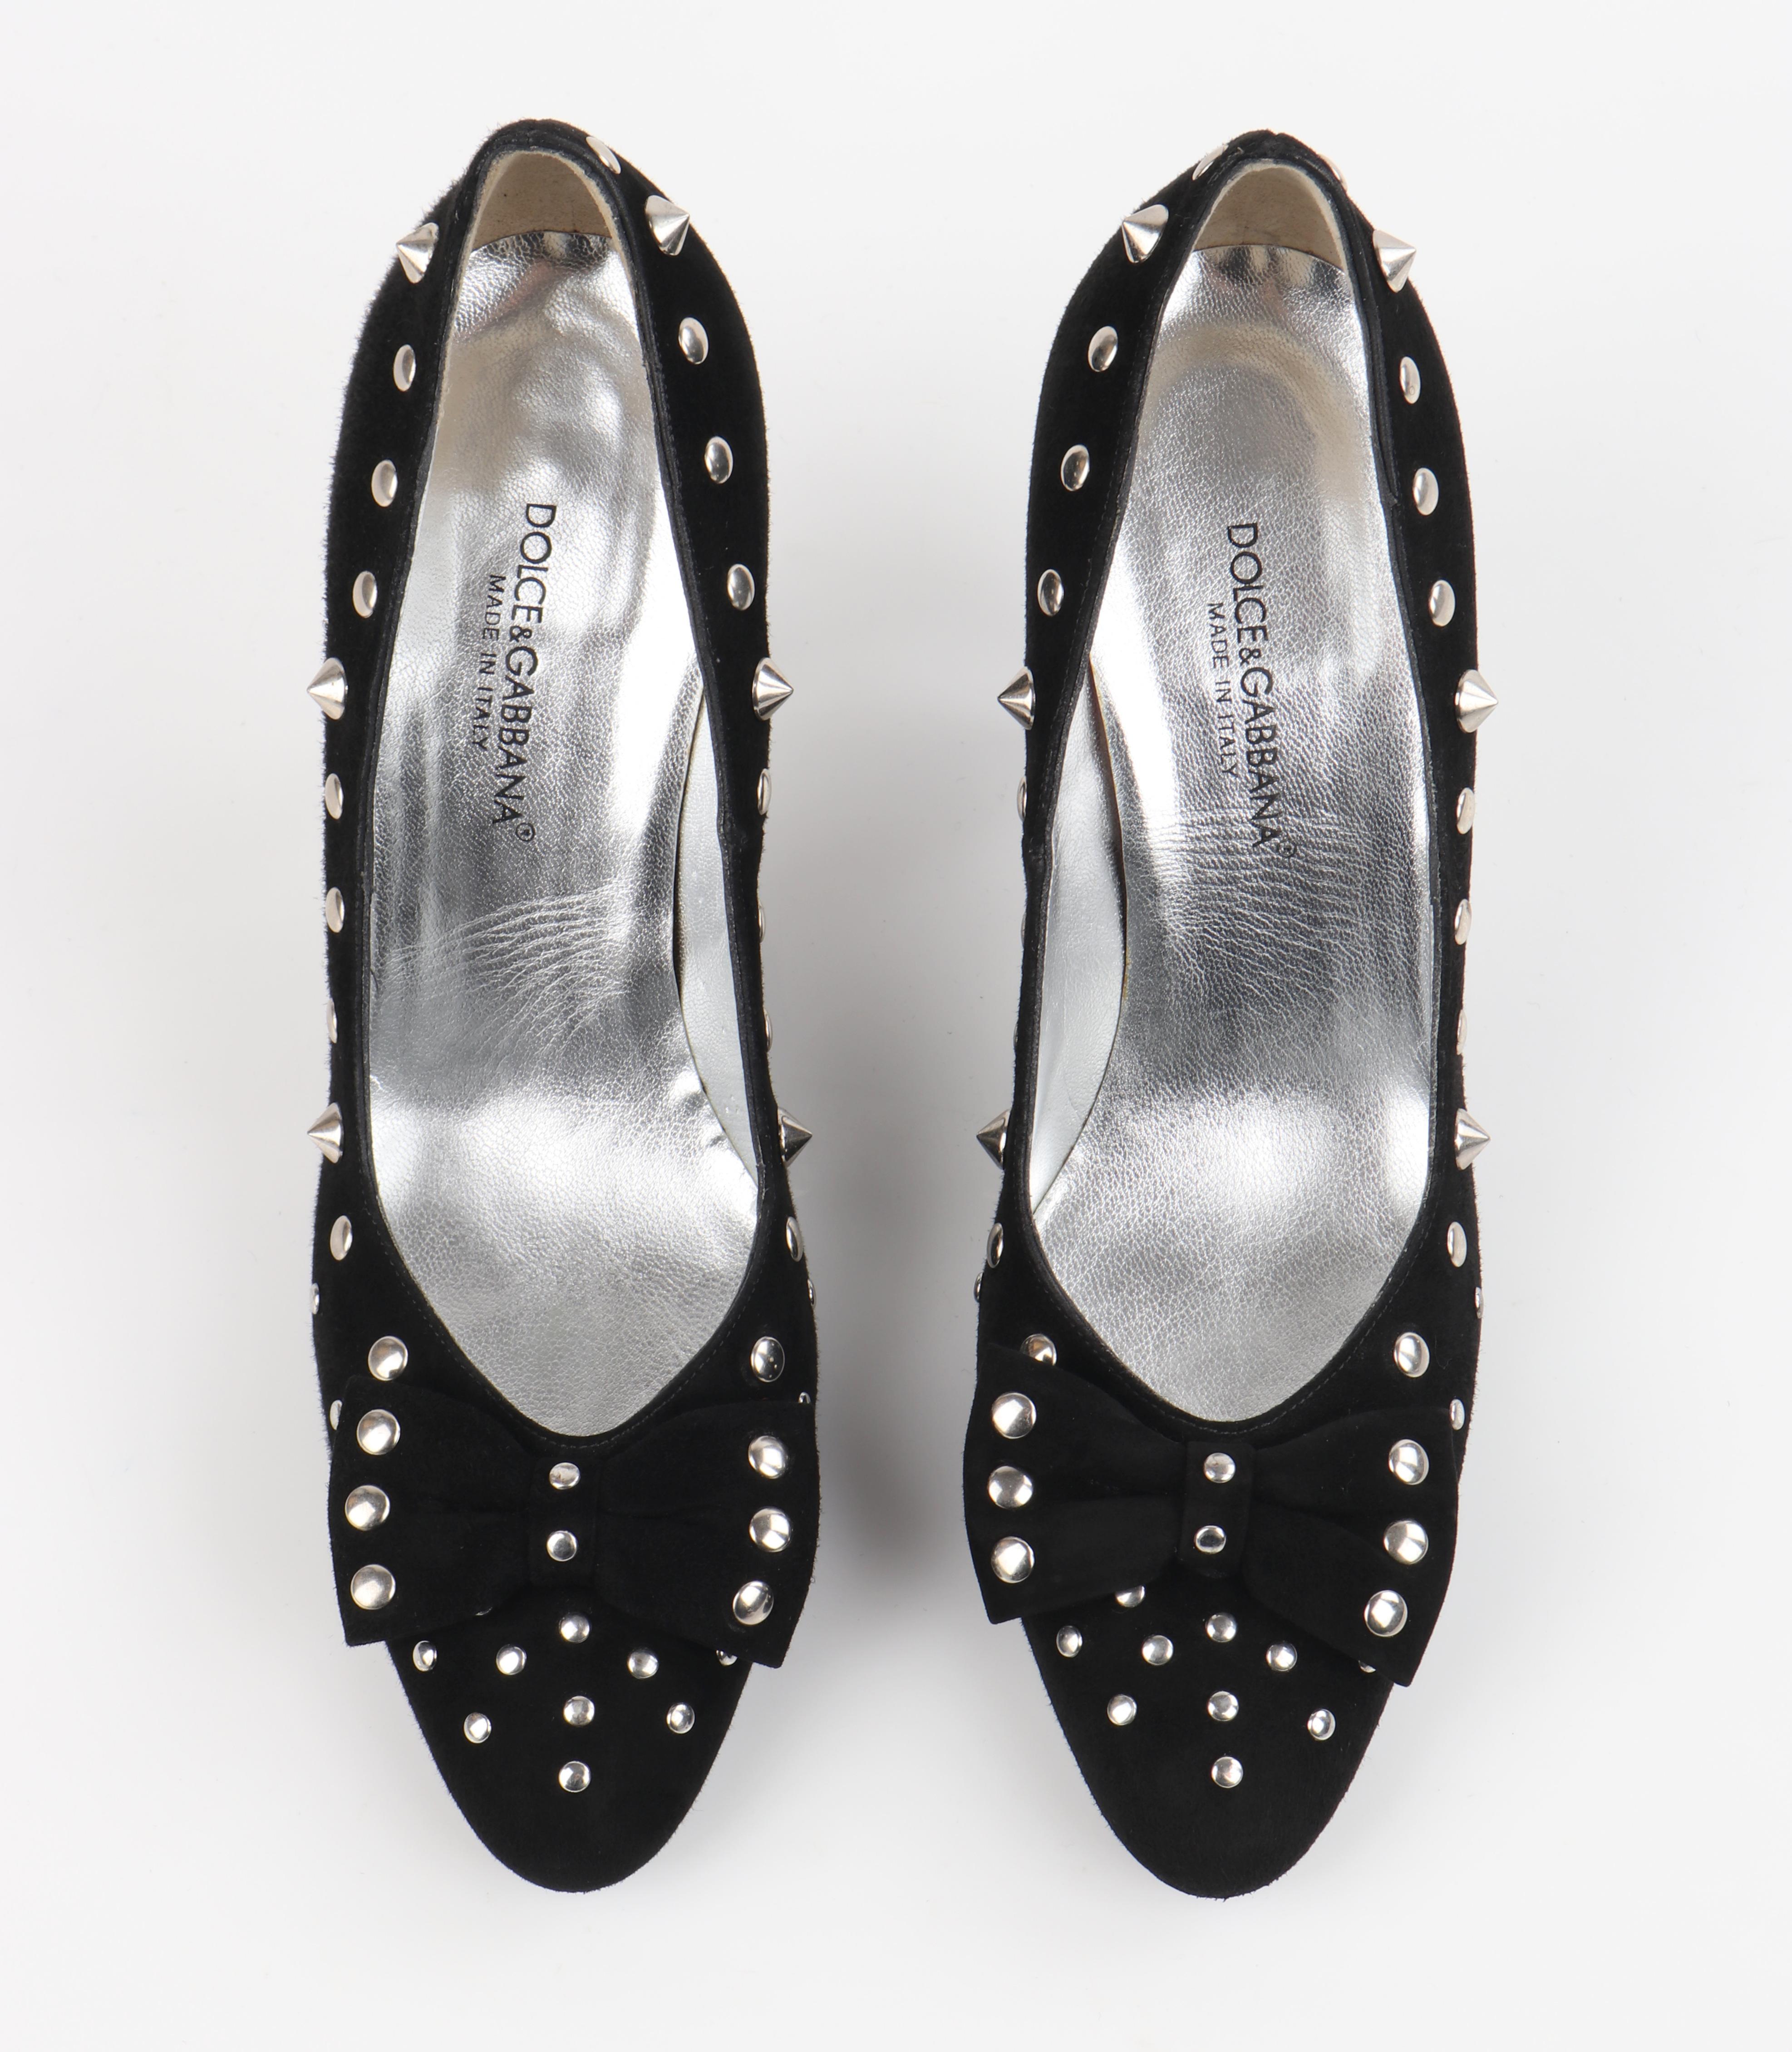 DOLCE & GABBANA Black Suede Silver Studded Vamp Bow Almond Toe Pumps Heels For Sale 2